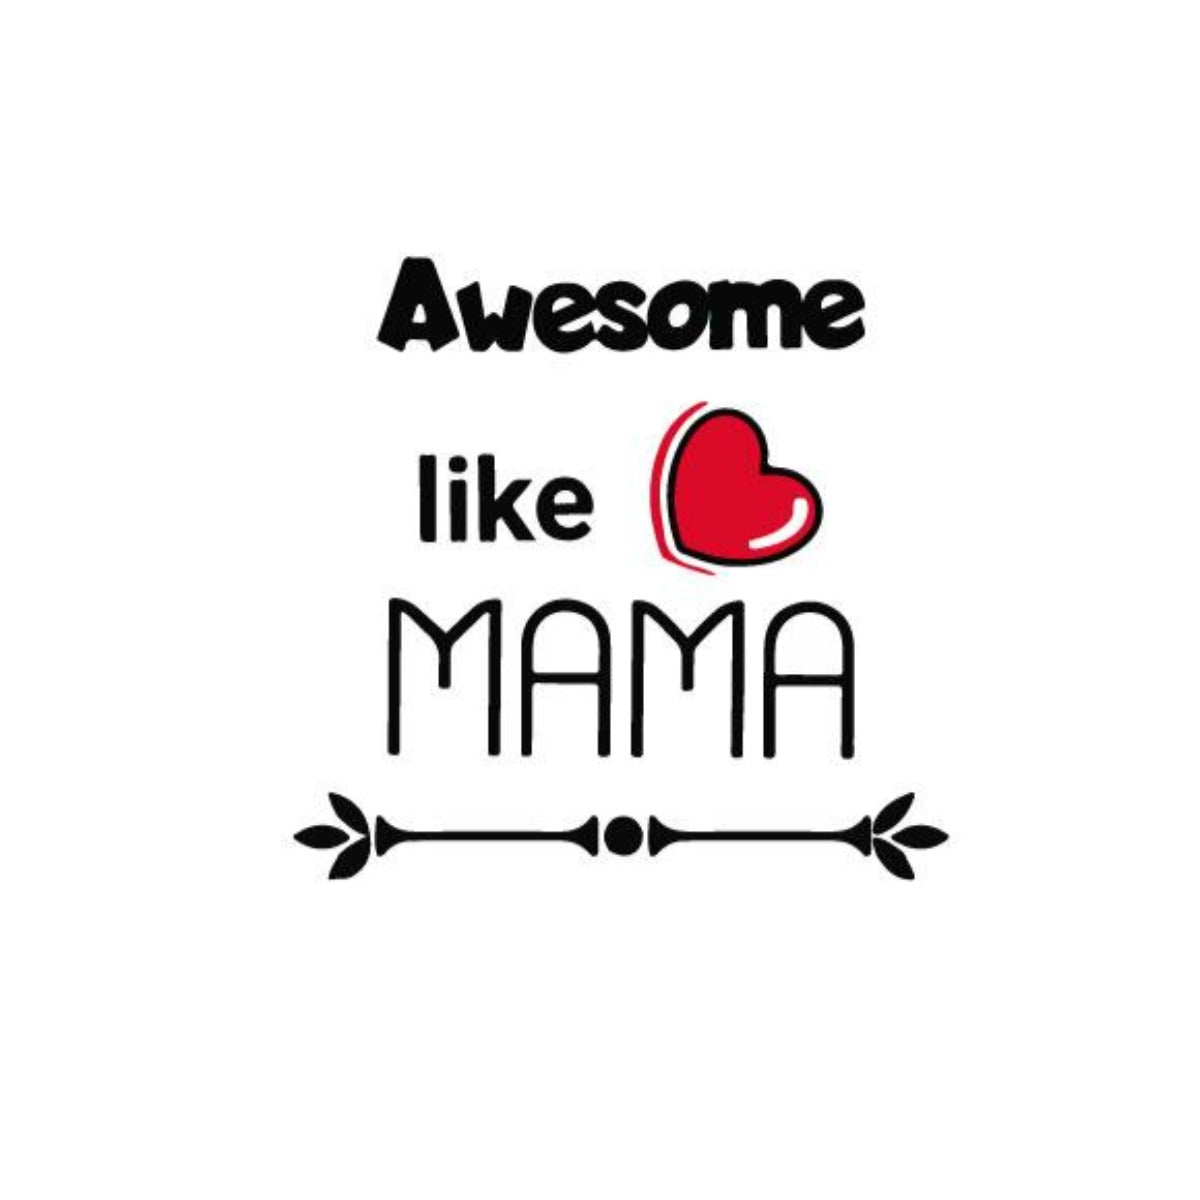 Awesome Like Mama- Funny expressions on cotton baby bibs by Suzy.B